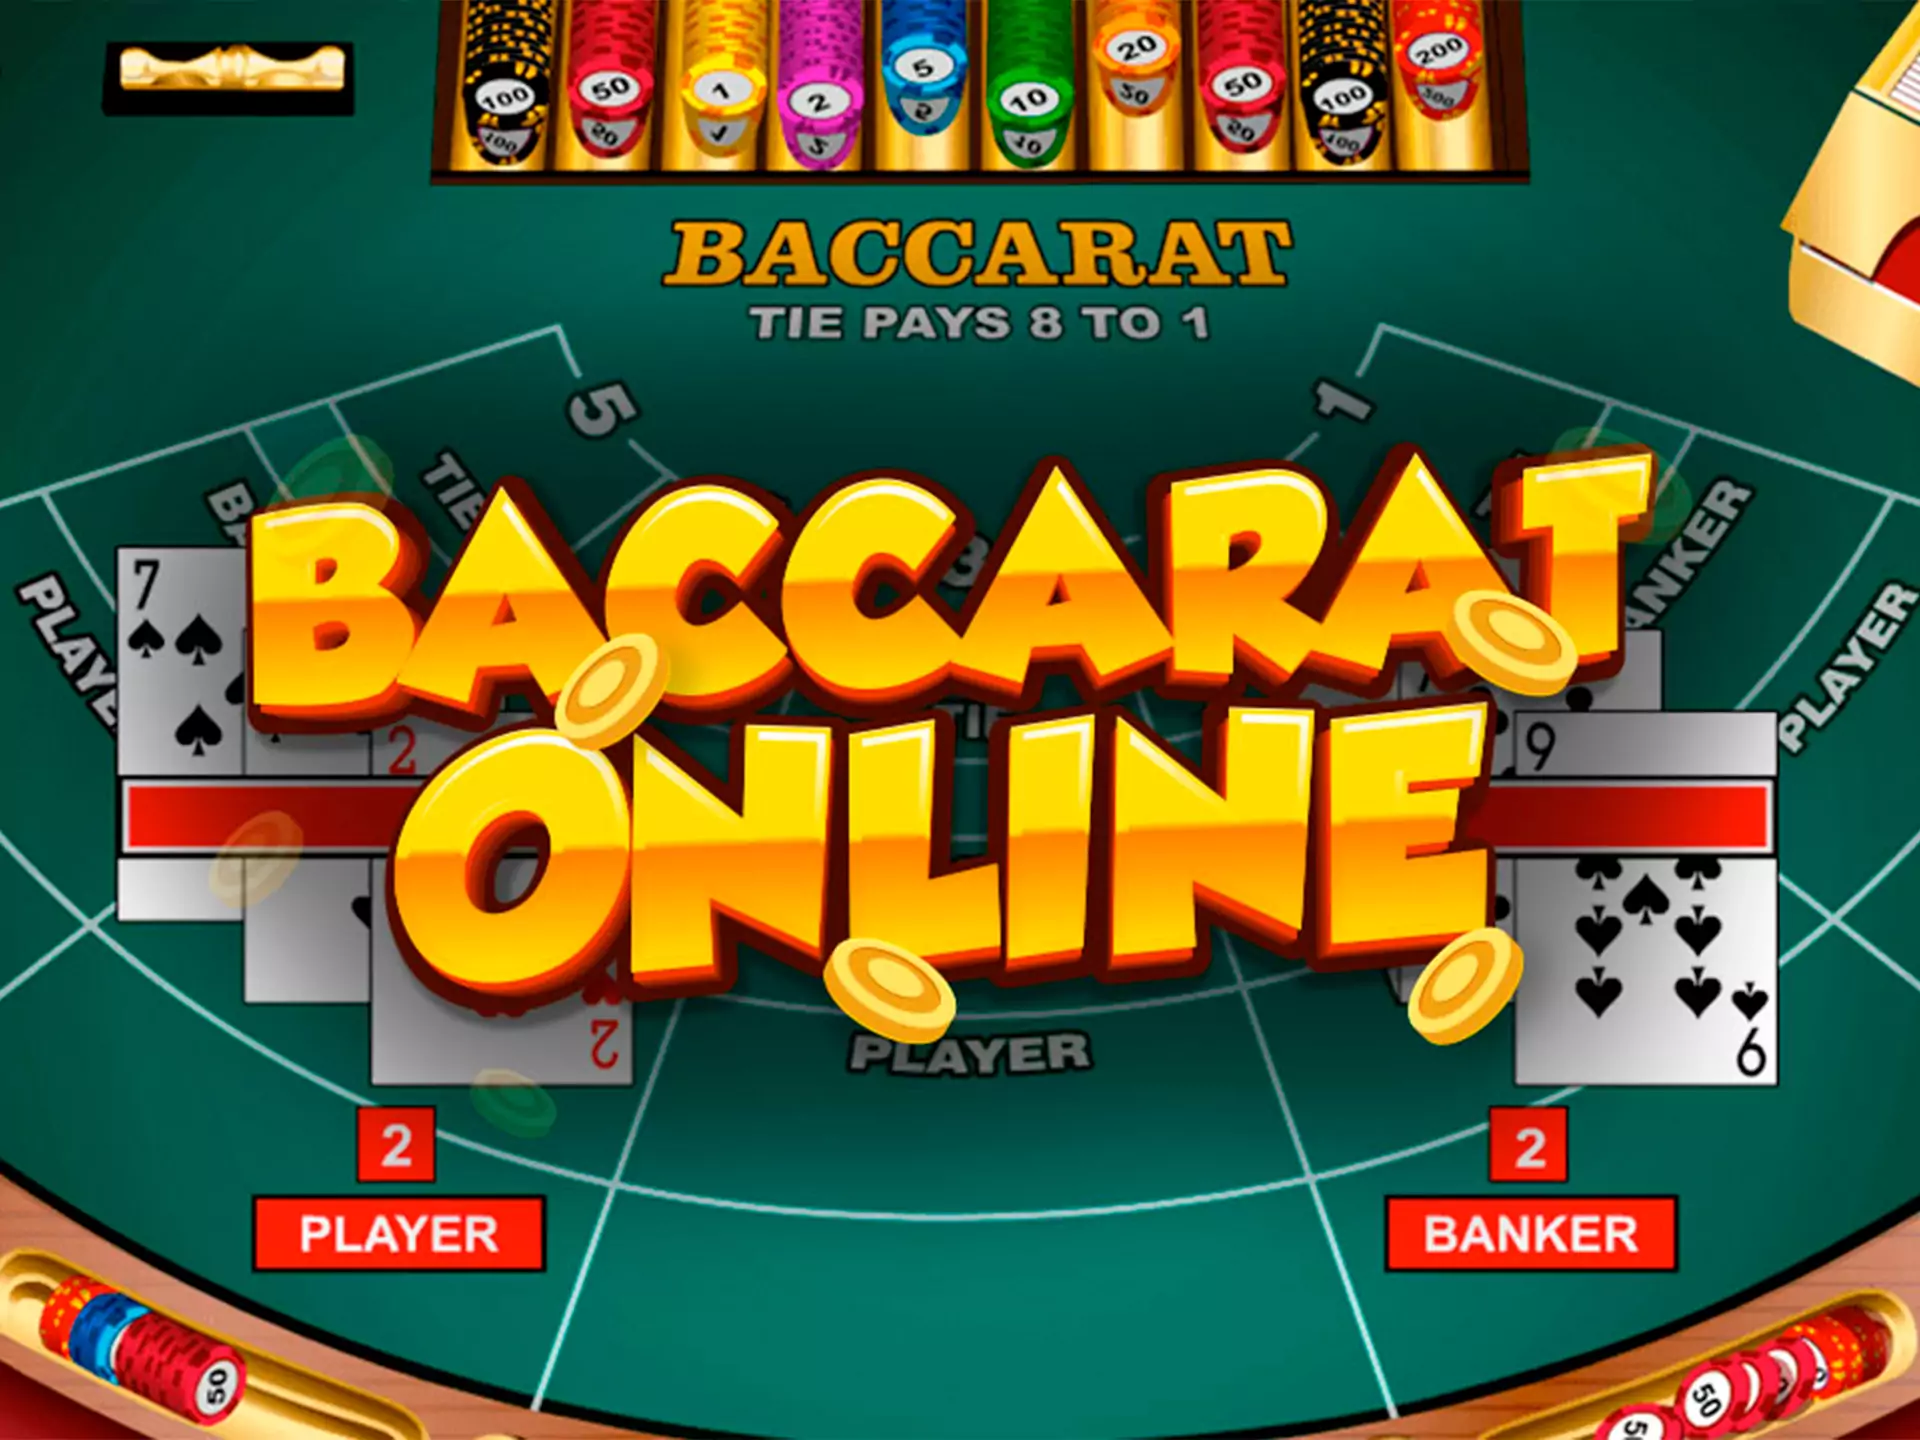 Test your skills and luck and try to win the Baccarat game.